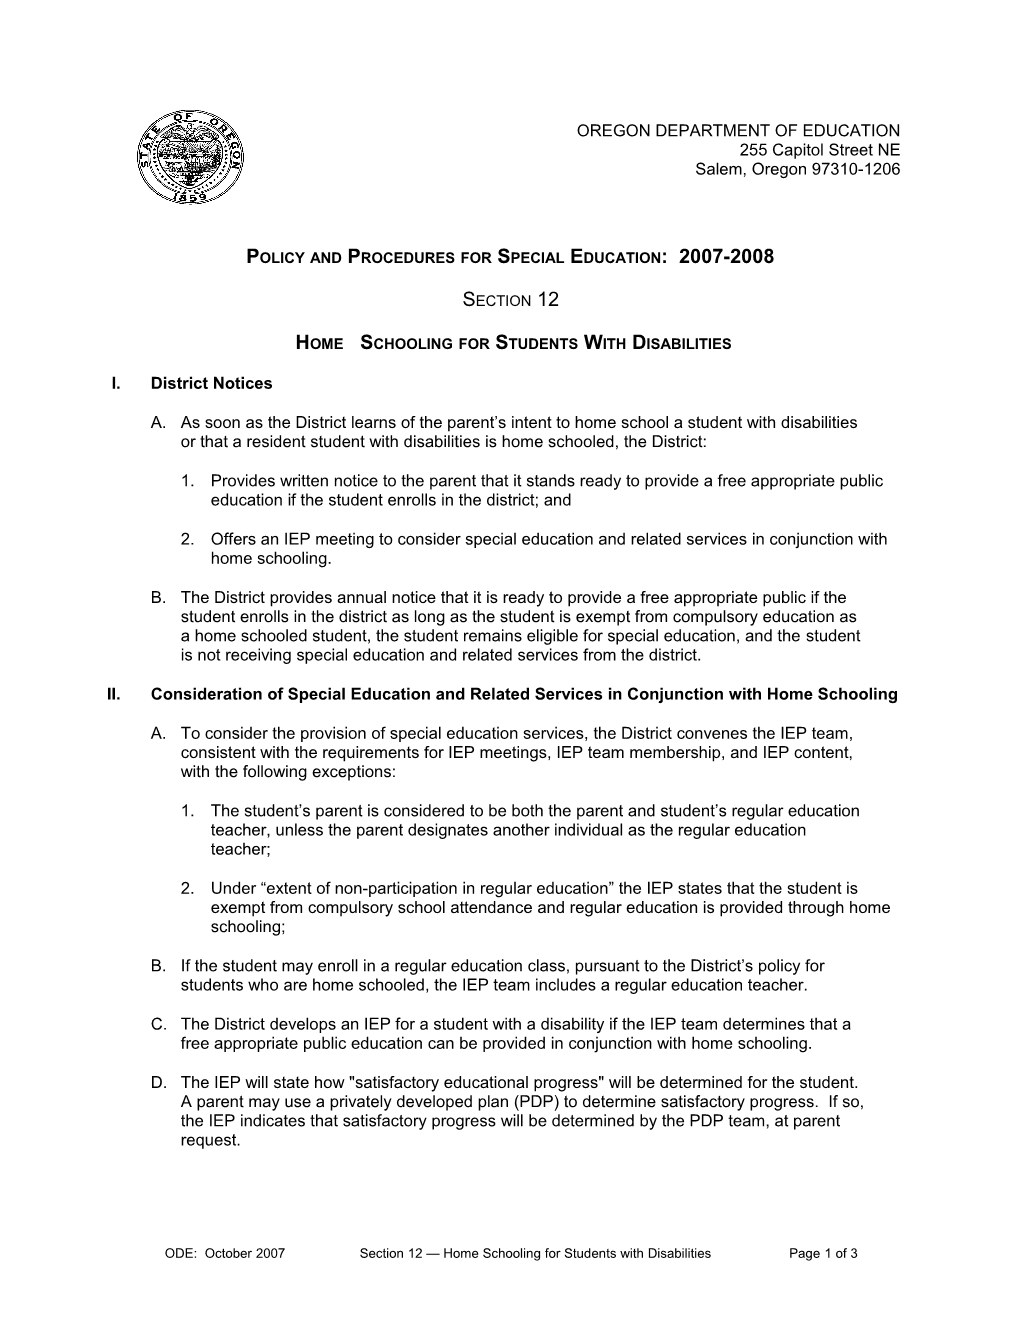 Policy and Procedures for Special Education: 2007-2008